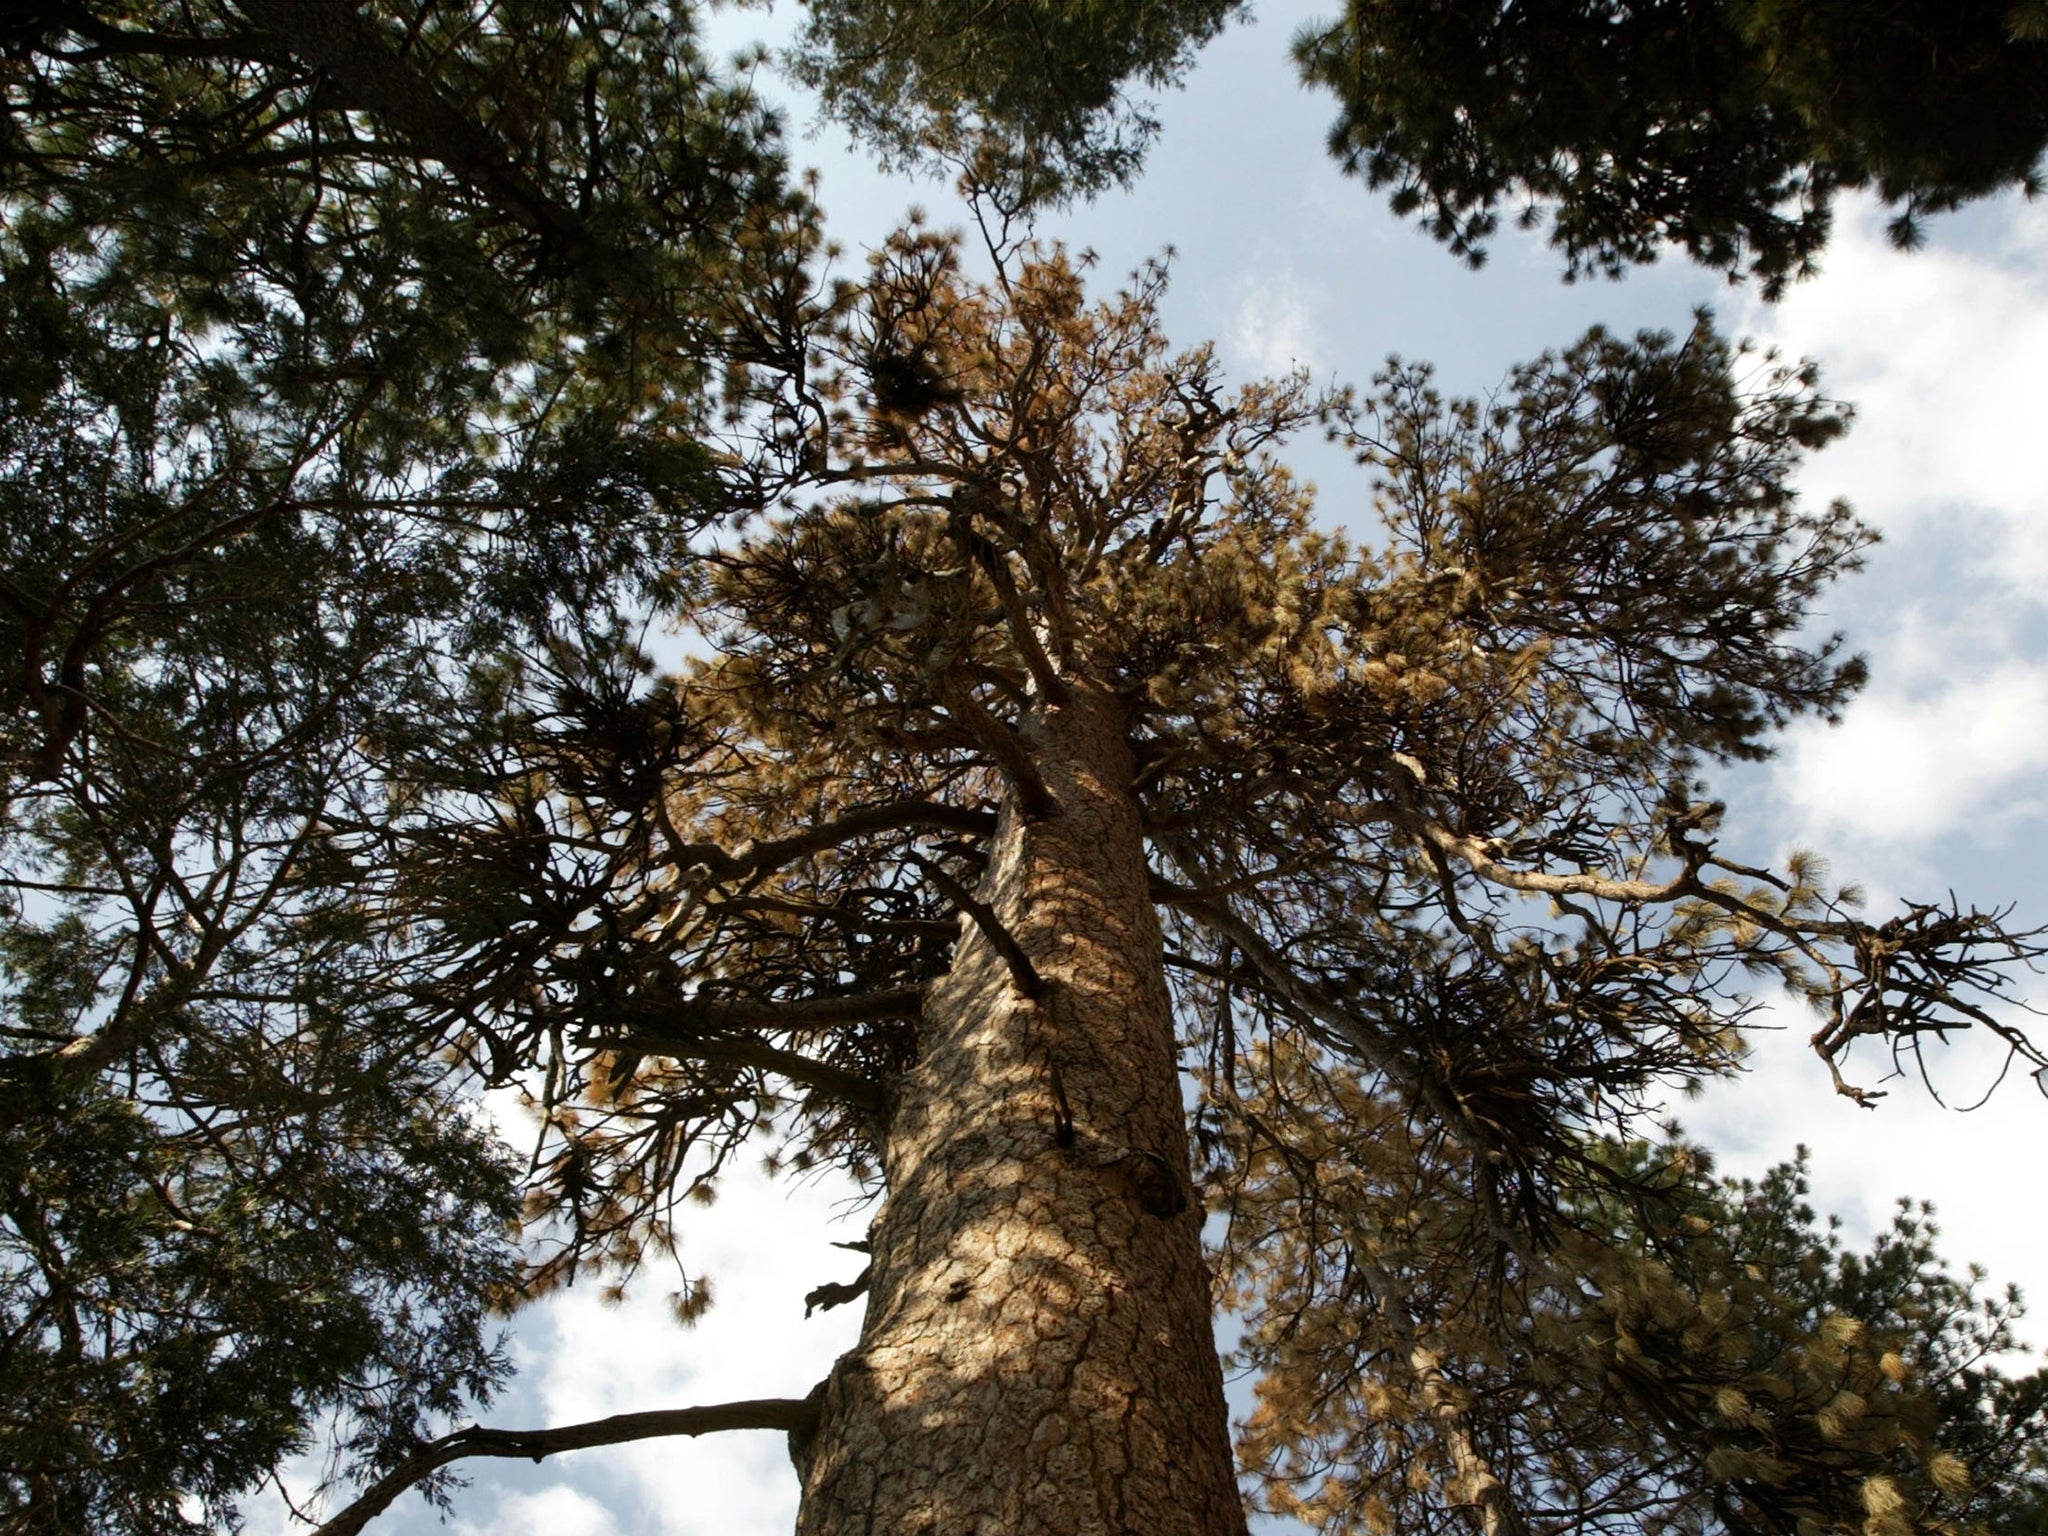 Older, larger trees are declining because of disease